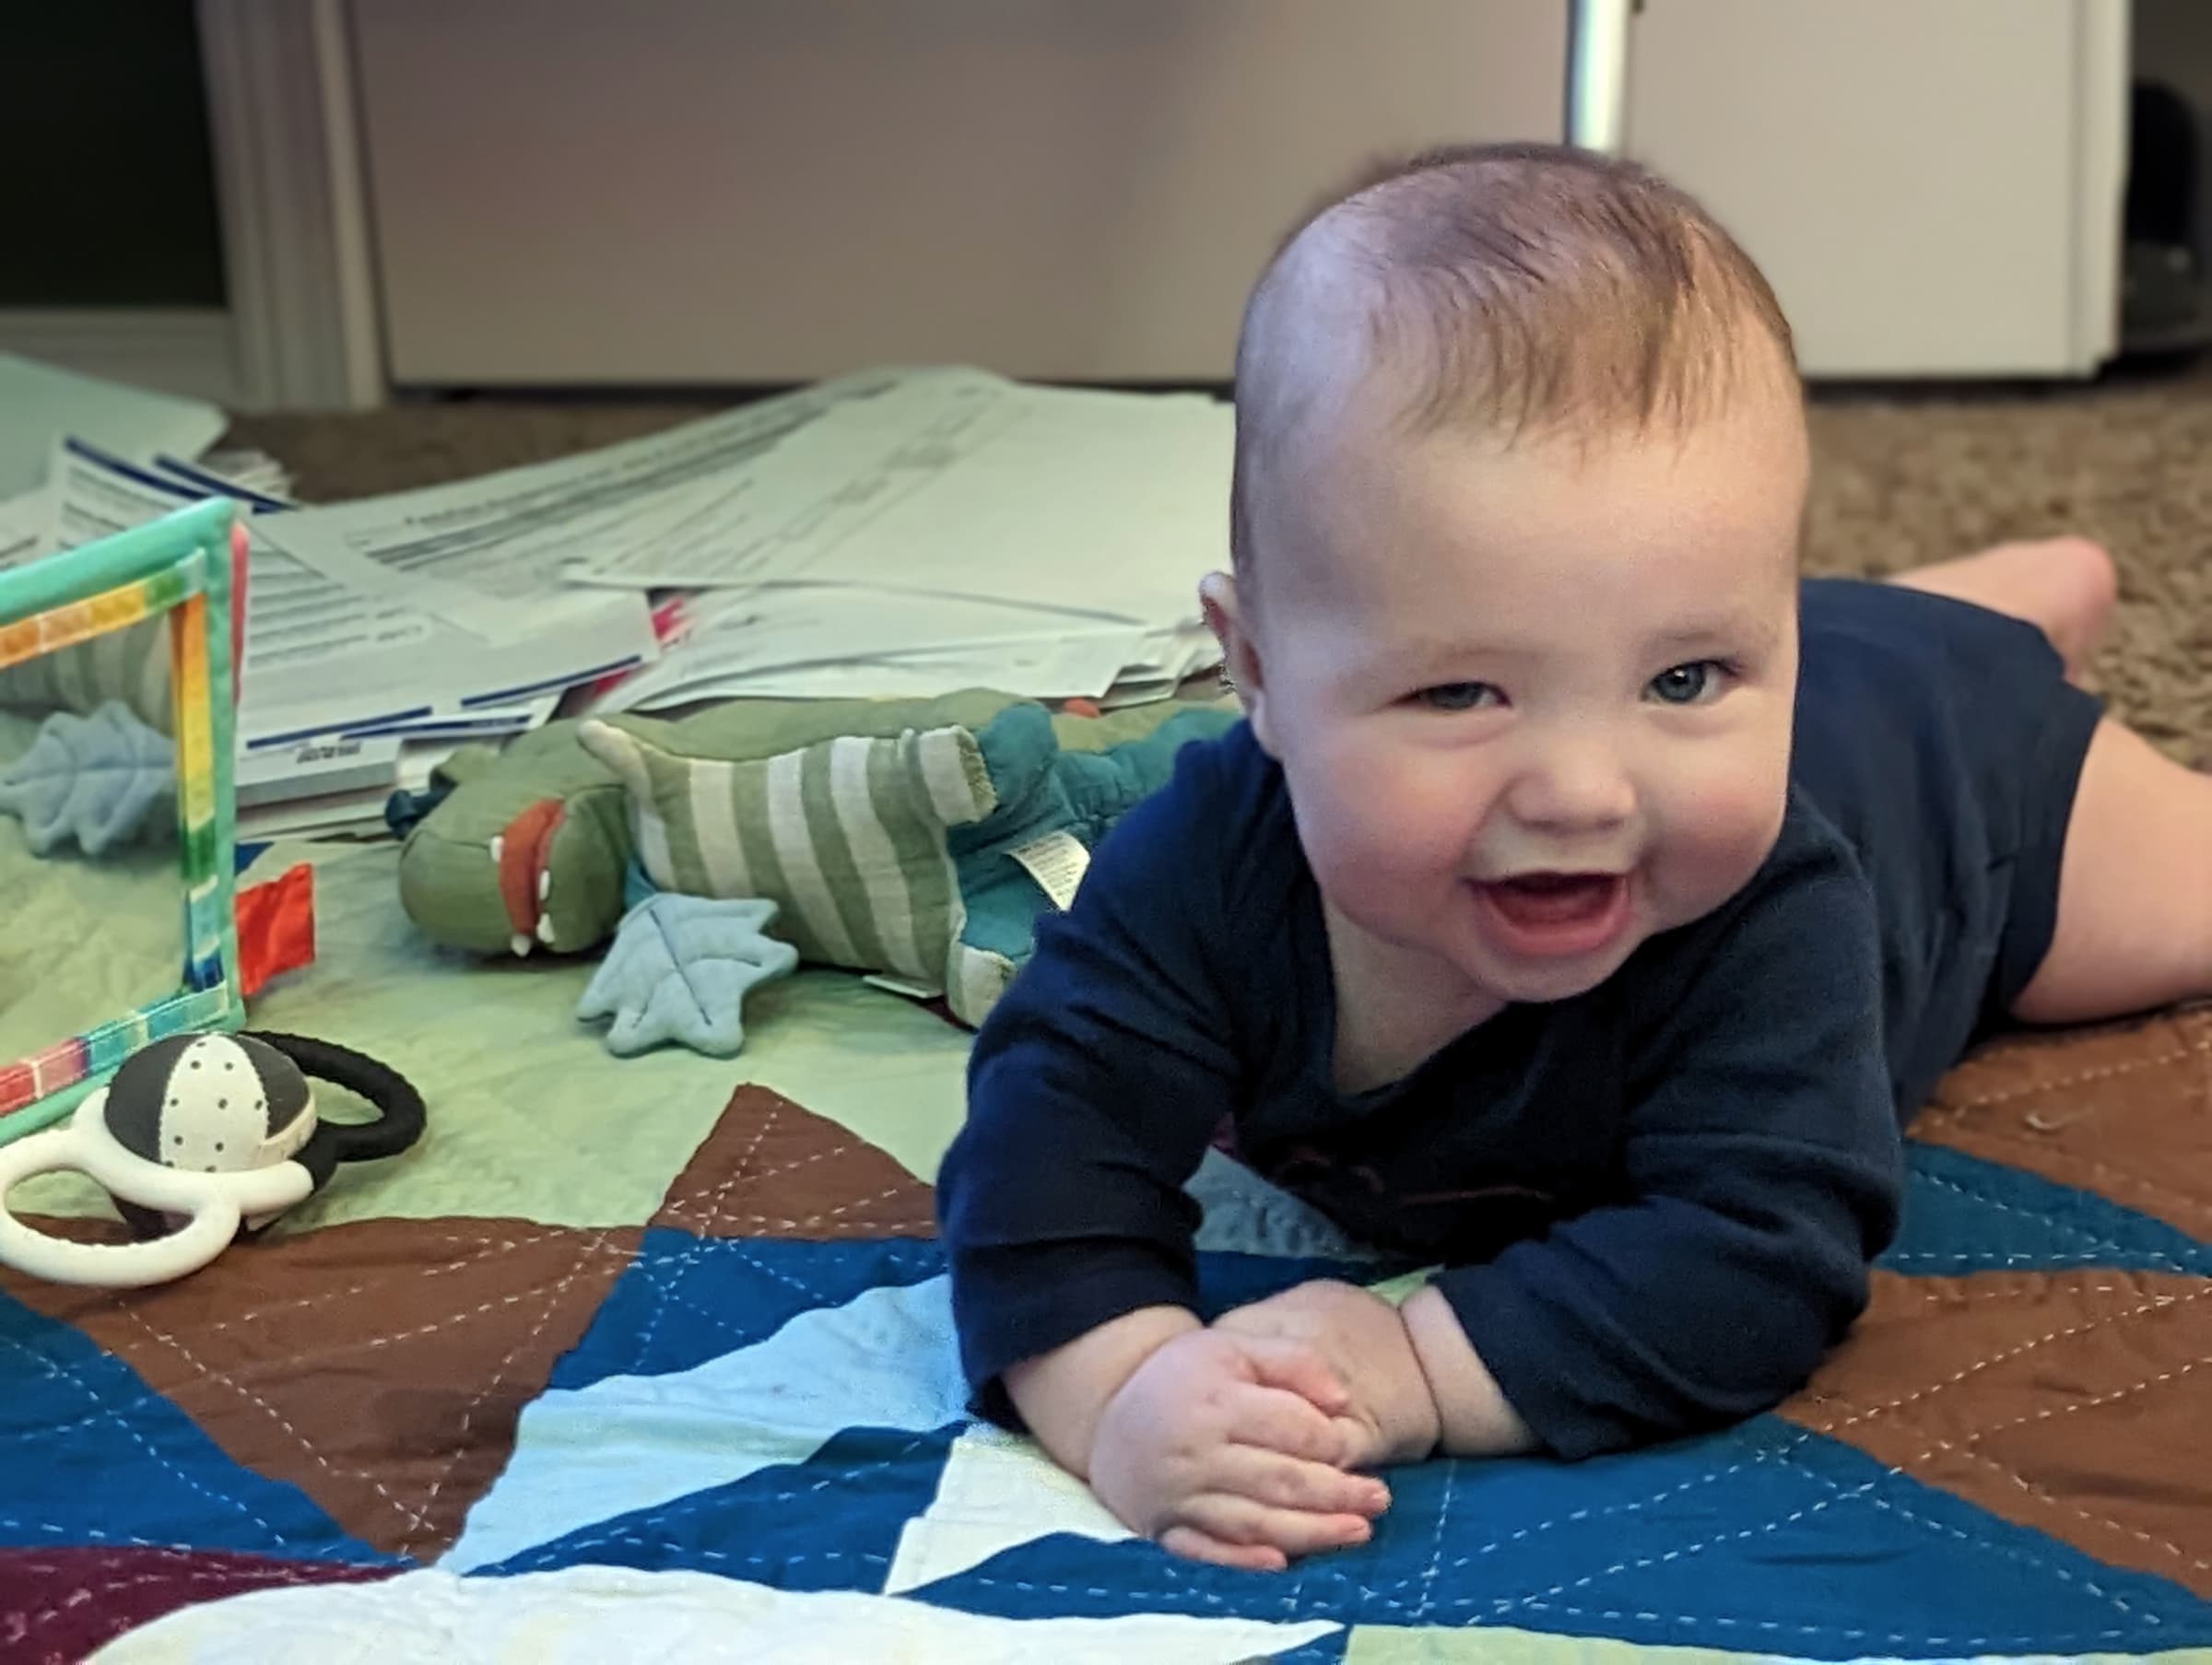 A baby laying on a quilt, looking at the camera with a goofy grin.